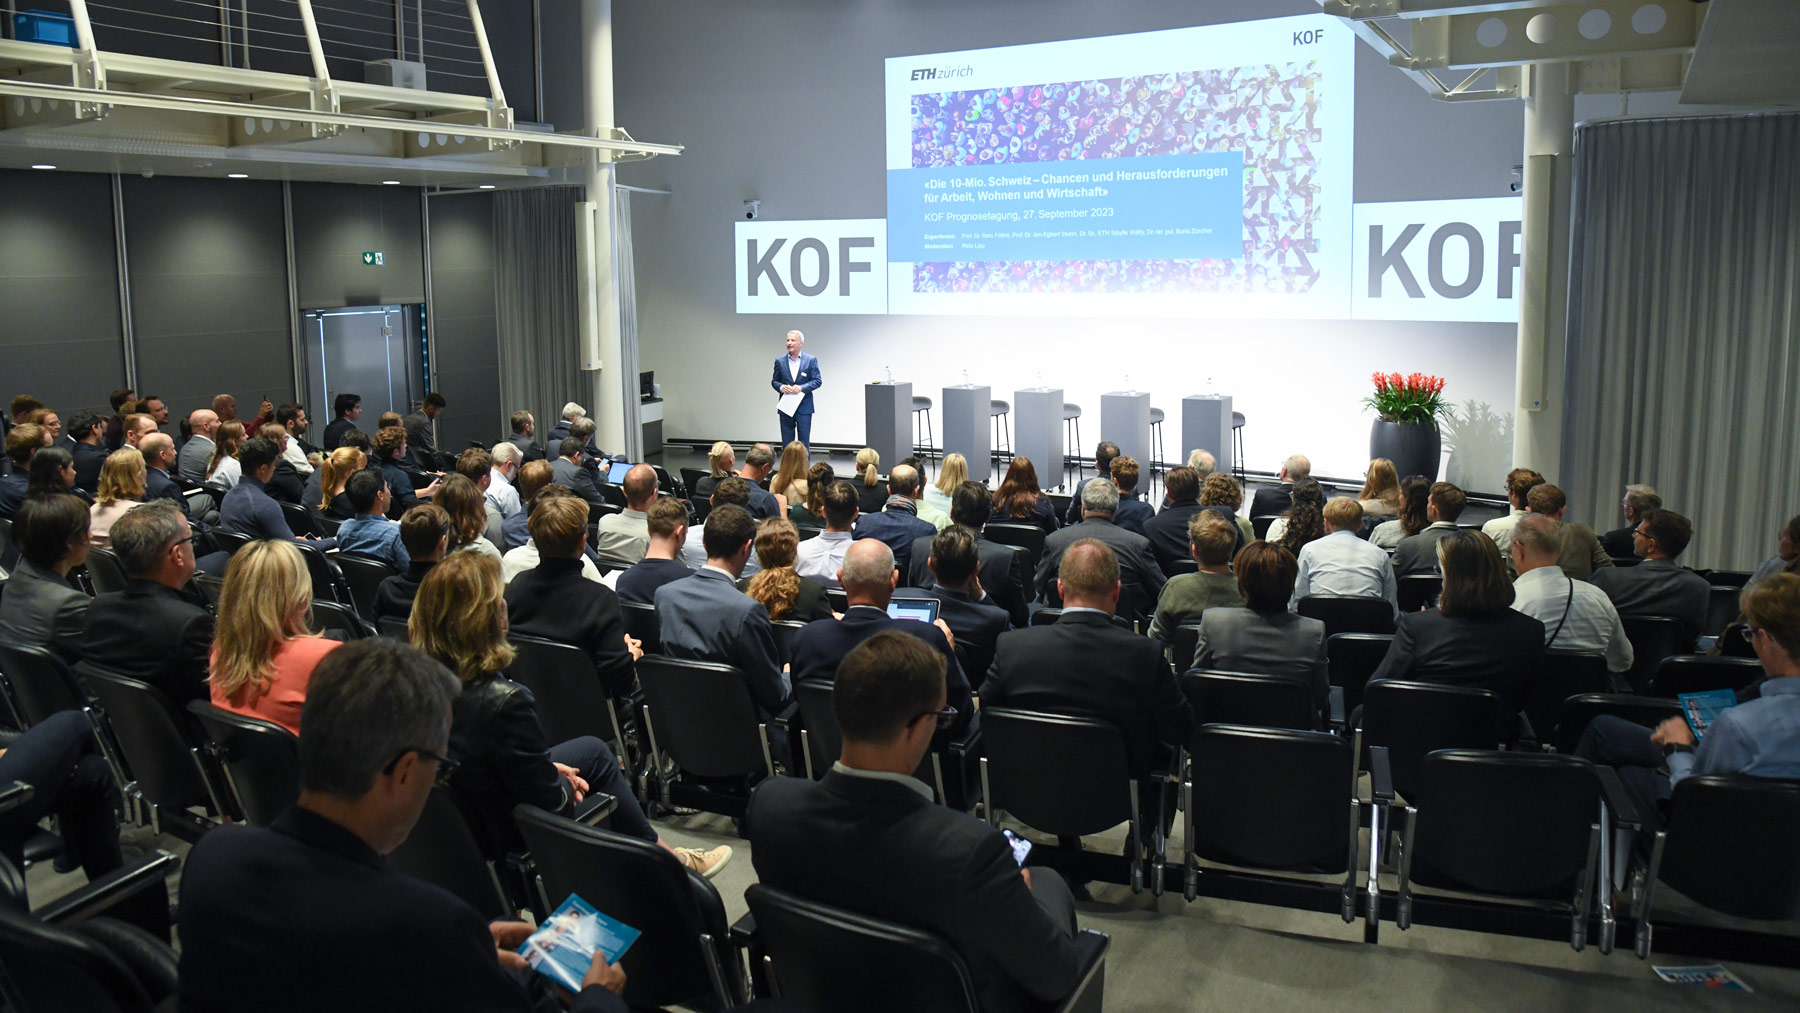 Enlarged view: ‘A Switzerland of 10 million people: challenges and opportunities for jobs, housing and the economy’; this was the topic being discussed by experts at KOF’s forecasting conference held in UBS’s Grünenhof conference centre. Moderator Reto Lipp can be seen on the left of the stage at the front (photo: André Springer).